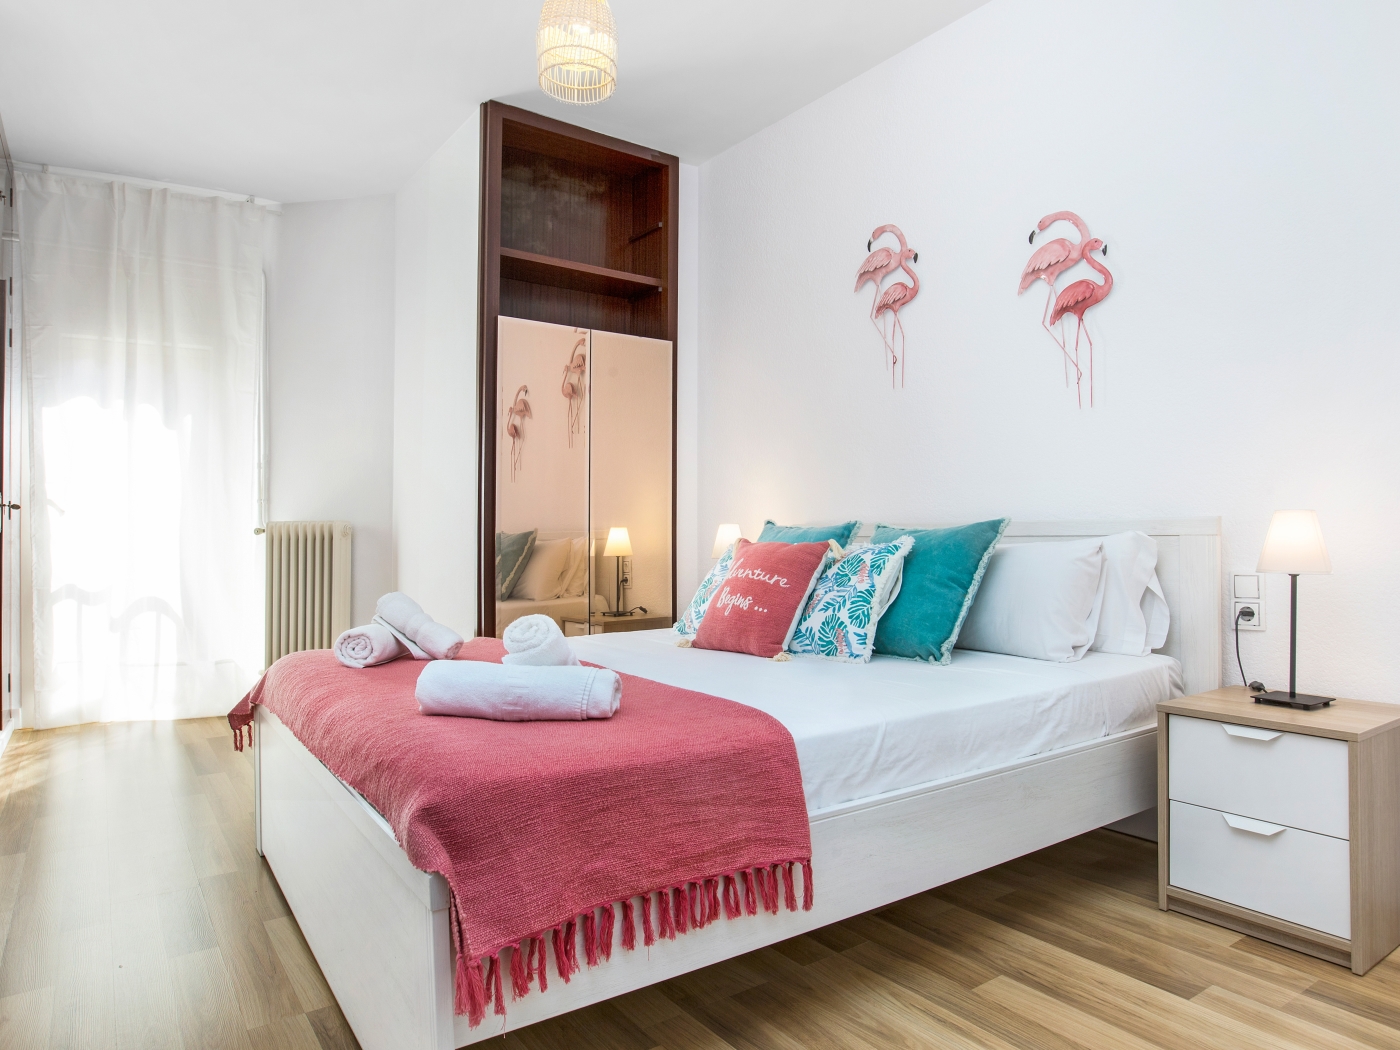 Exclusive and spacious apartment in the center of Barcelona for monthly rentals - My Space Barcelona Apartments